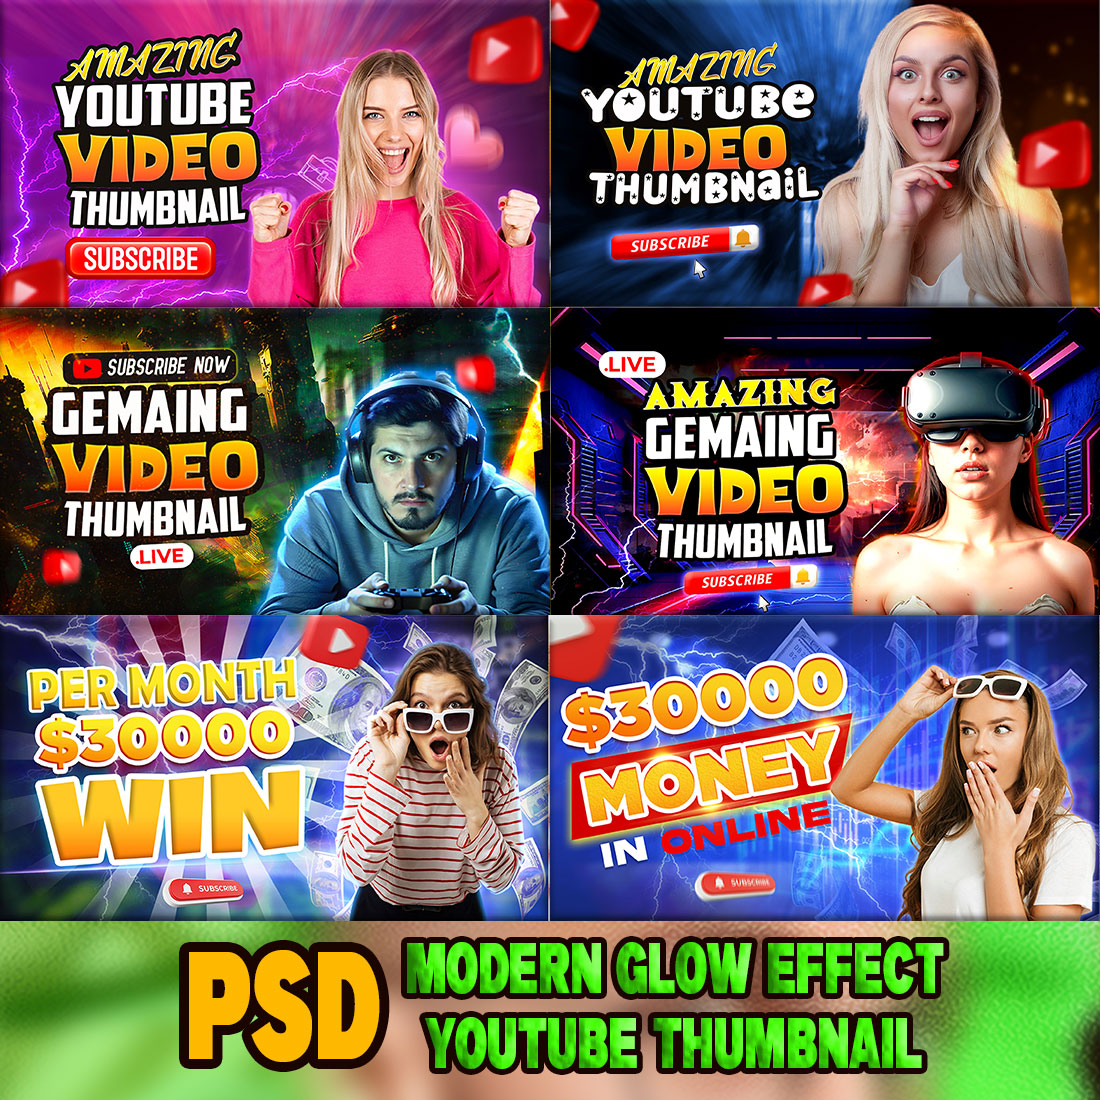 PSD Modern glow effect youtube video thumbnail template design fully editable preview image.